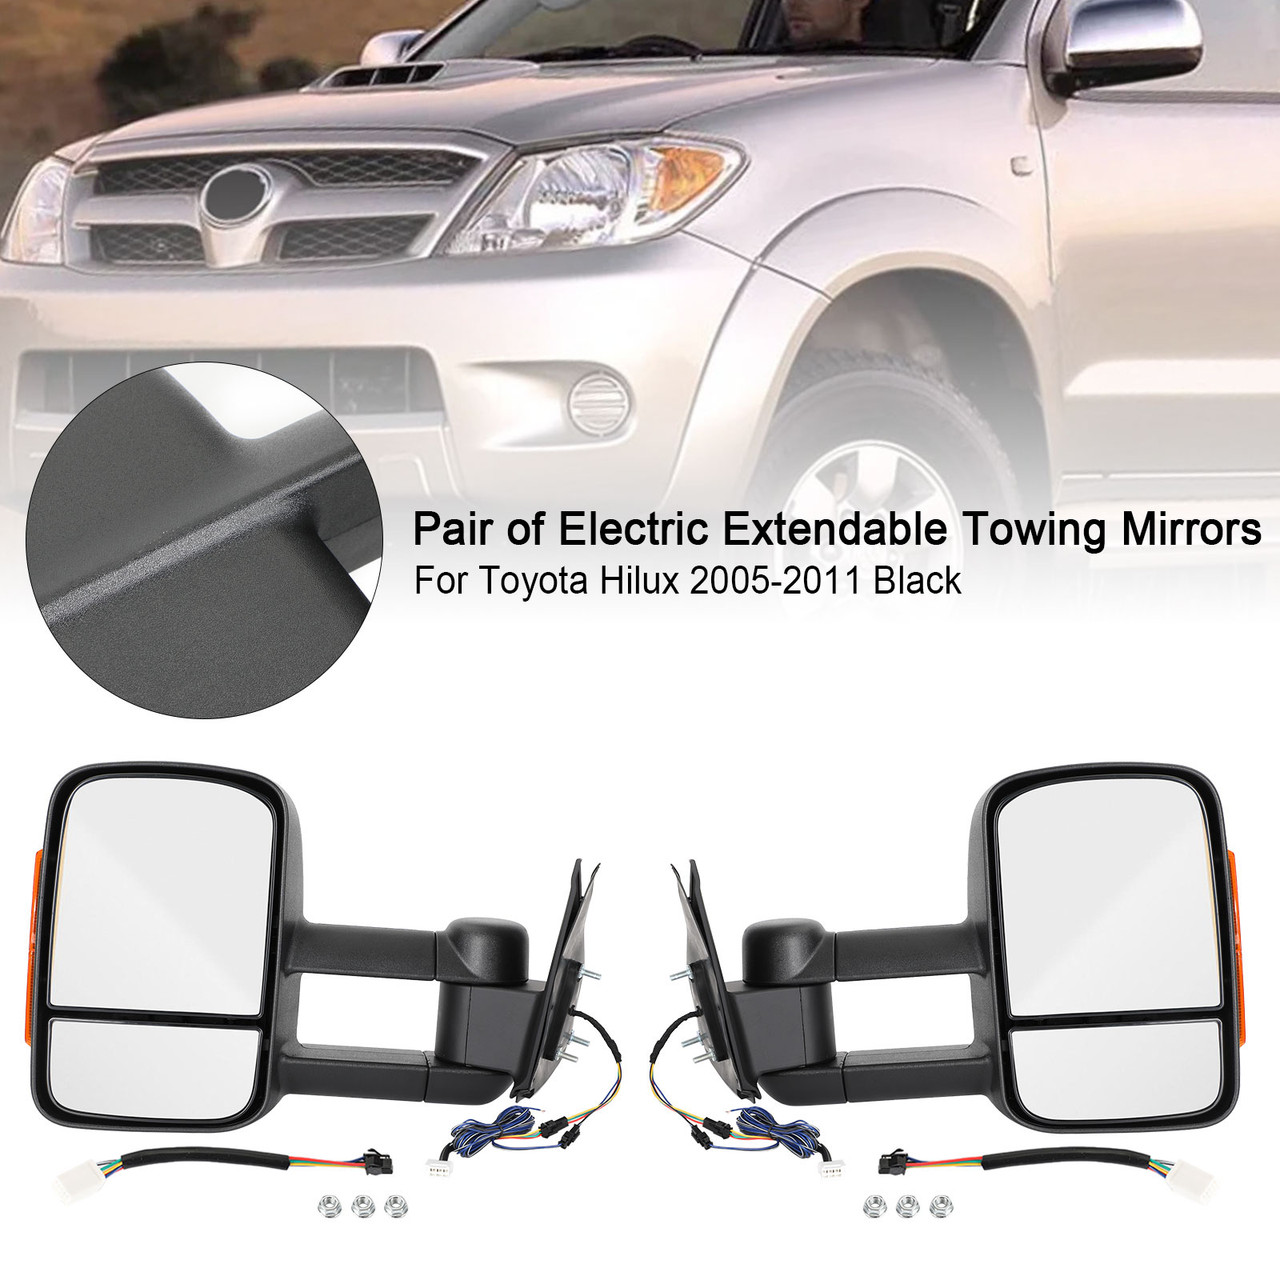 Pair of Electric Extendable Towing Mirrors for Toyota Hilux 2005-2011 Black